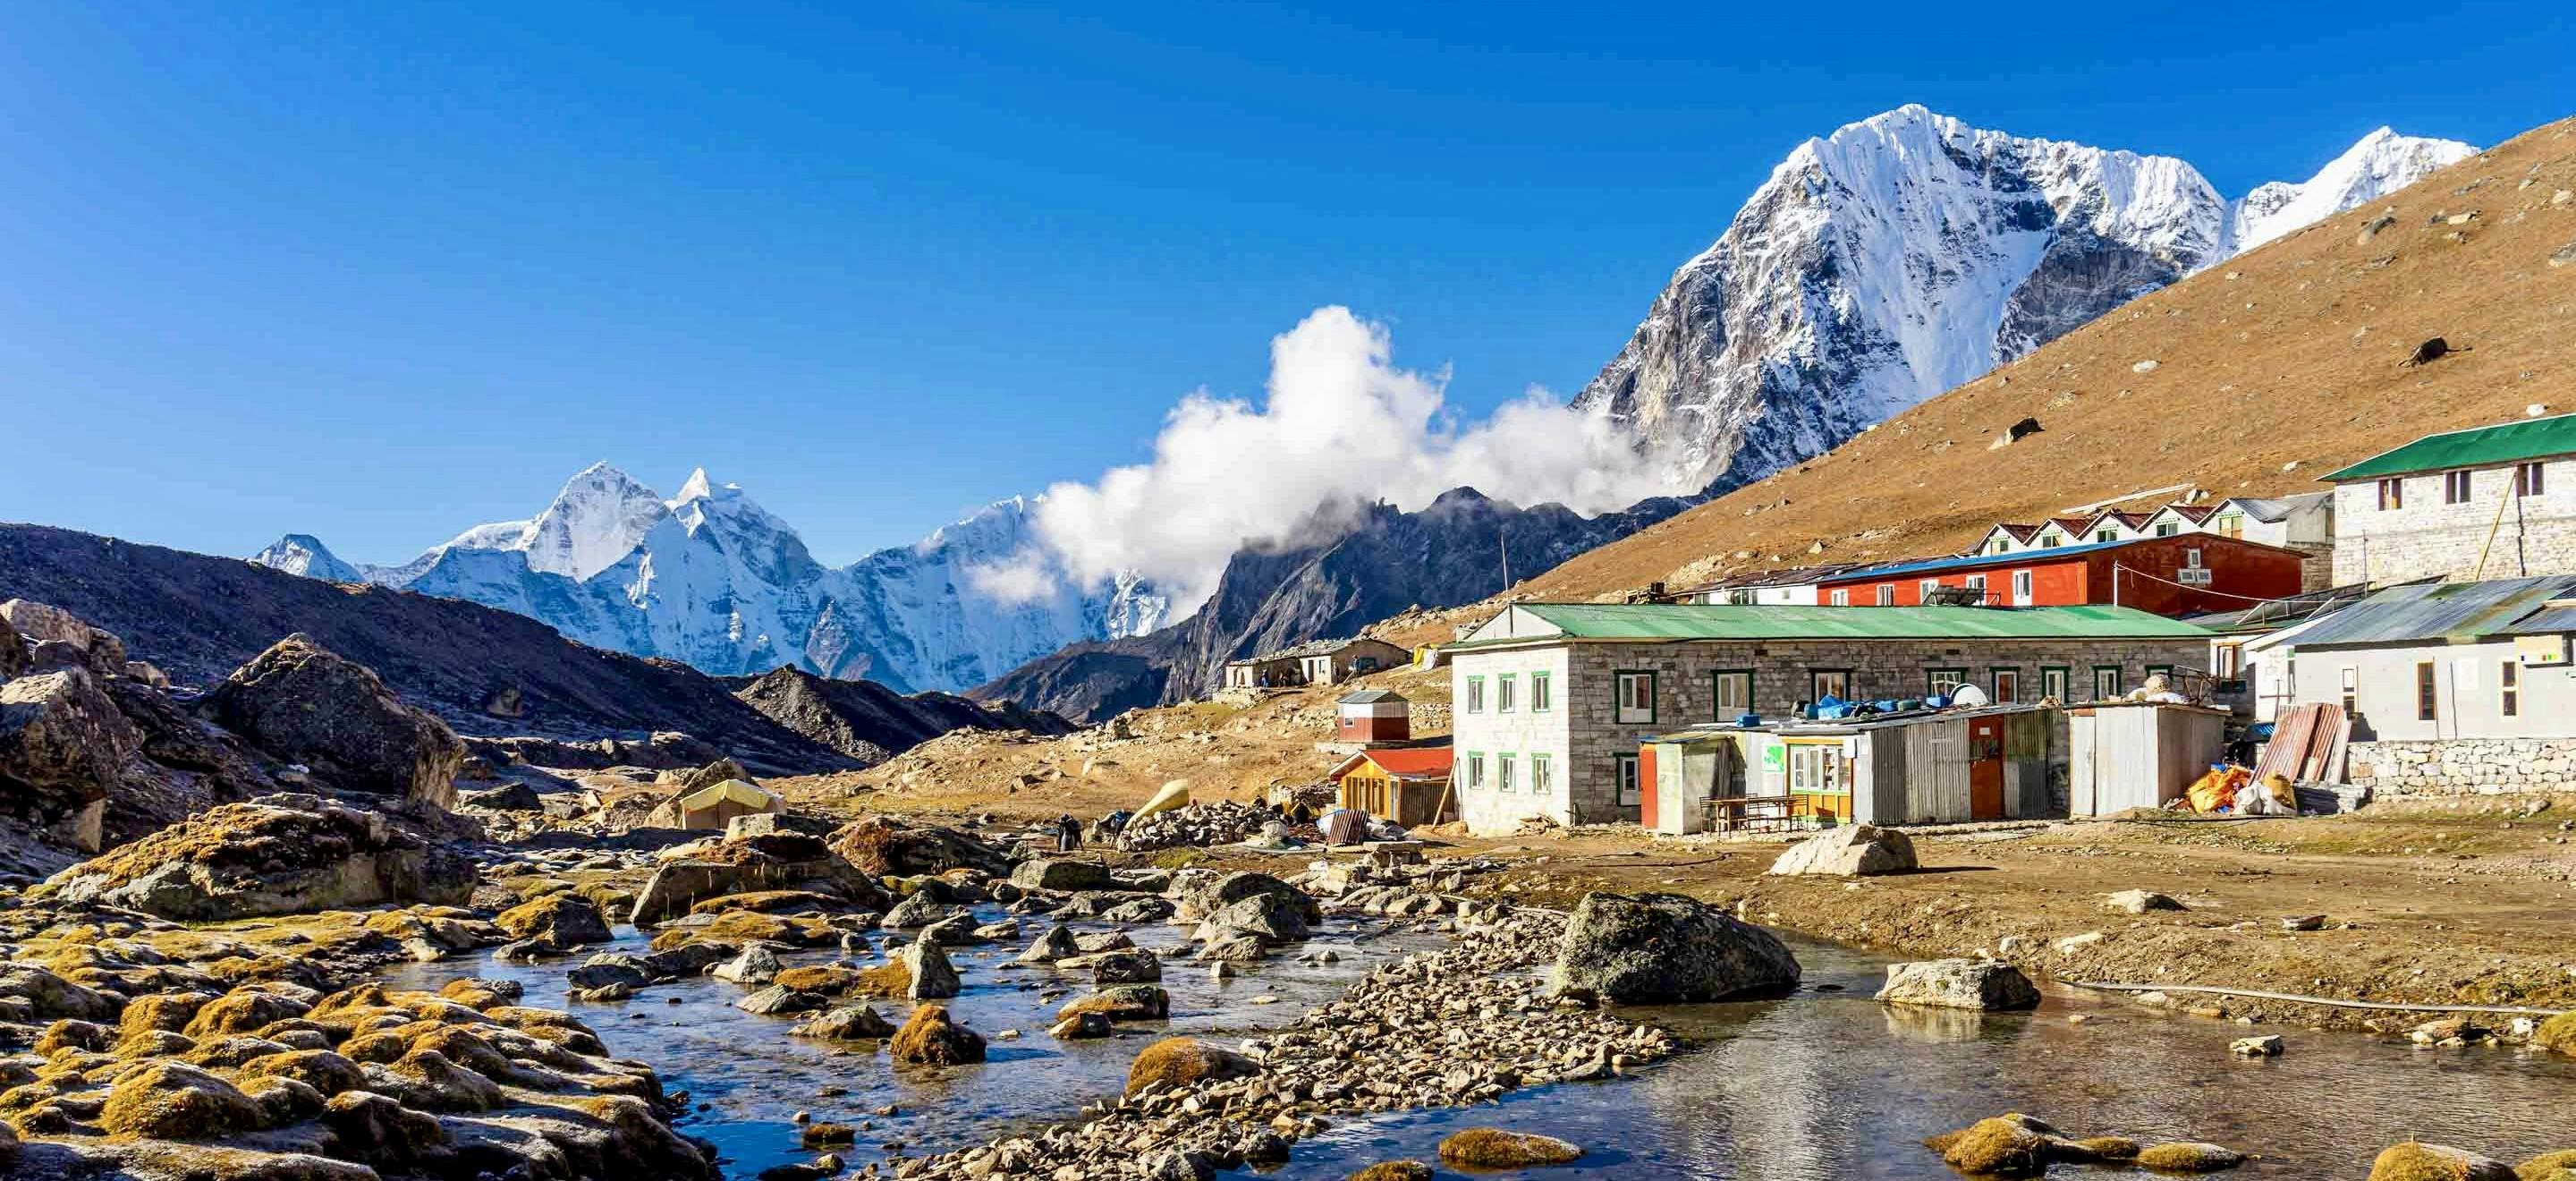 A Complete Guide to Book to the Everest Base Camp Trek